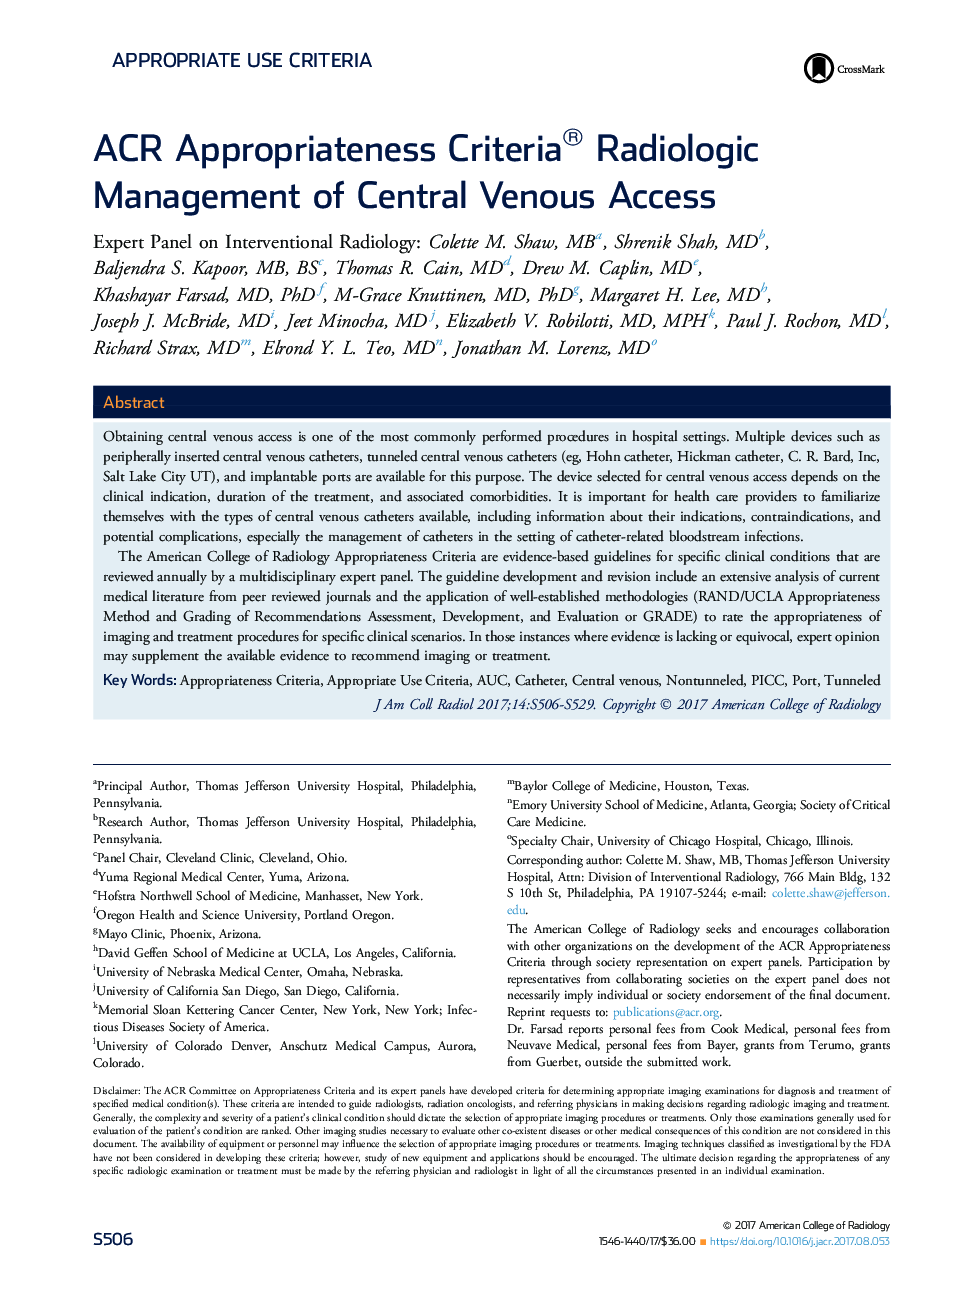 ACR Appropriateness Criteria® Radiologic Management of Central Venous Access